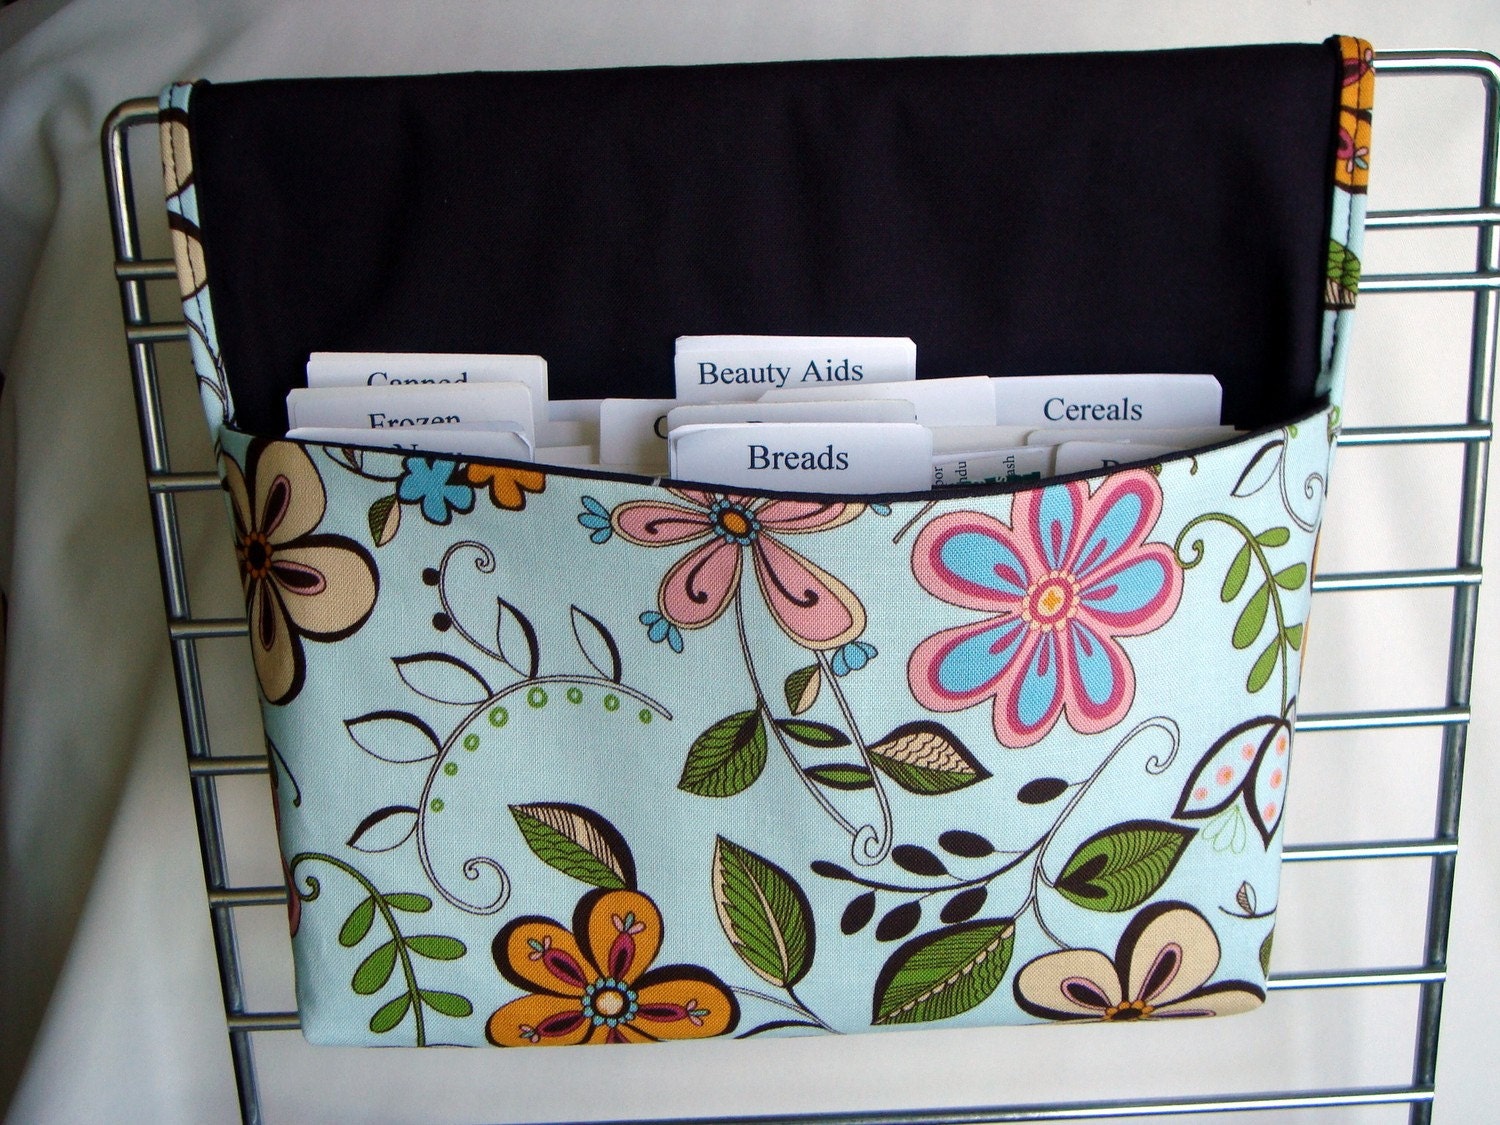 Coupon Organizer /Budget Organizer Holder -  Attaches to Your Shopping Cart - Happy Flowers